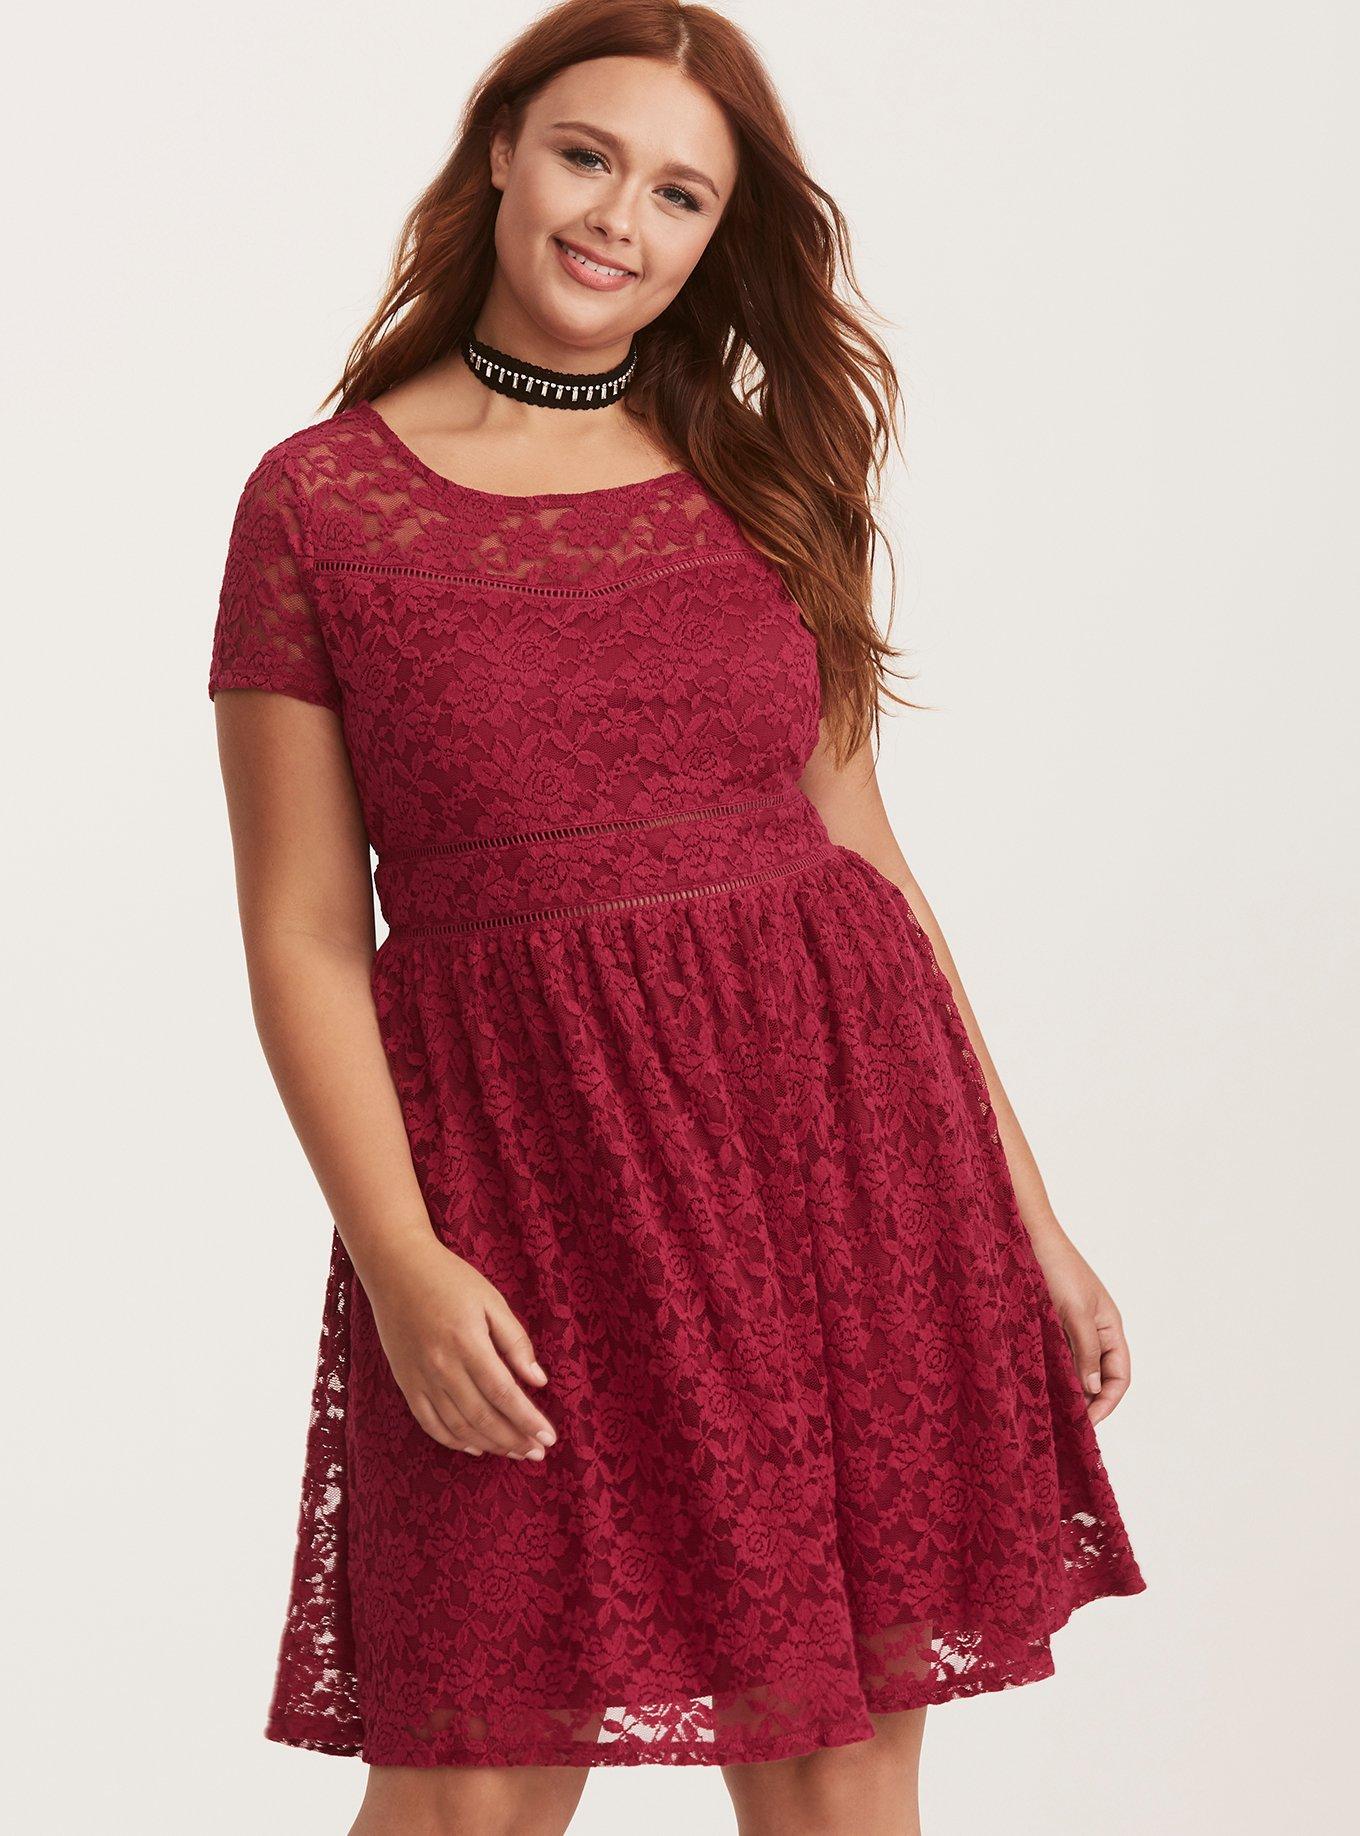 Plus Size - Berry Red Lace Scoop Skater Dress - Torrid